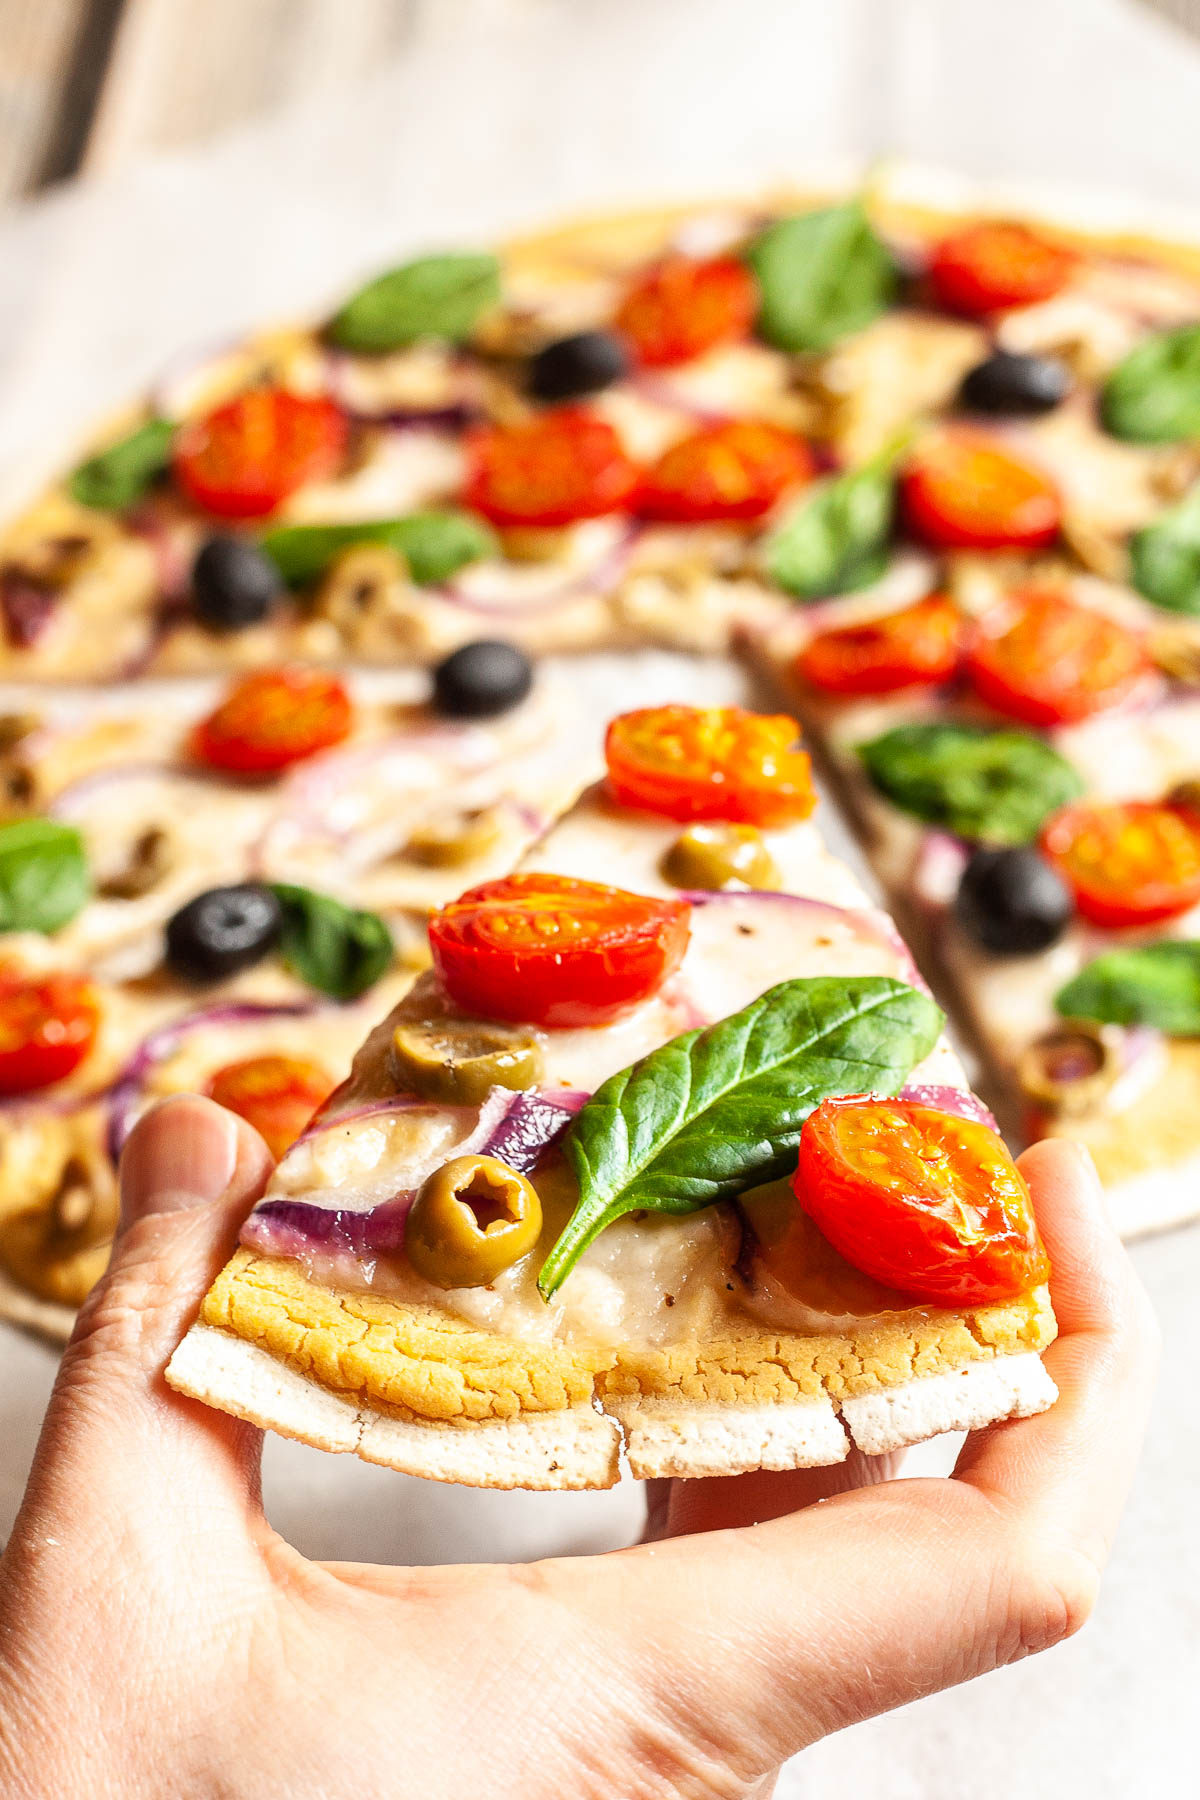 A hand is holding a slice of baked pizza with melted cheese, cherry tomatoes, purple onion slices, green olives and fresh basil leaves the remaining of the pizza is at the background.